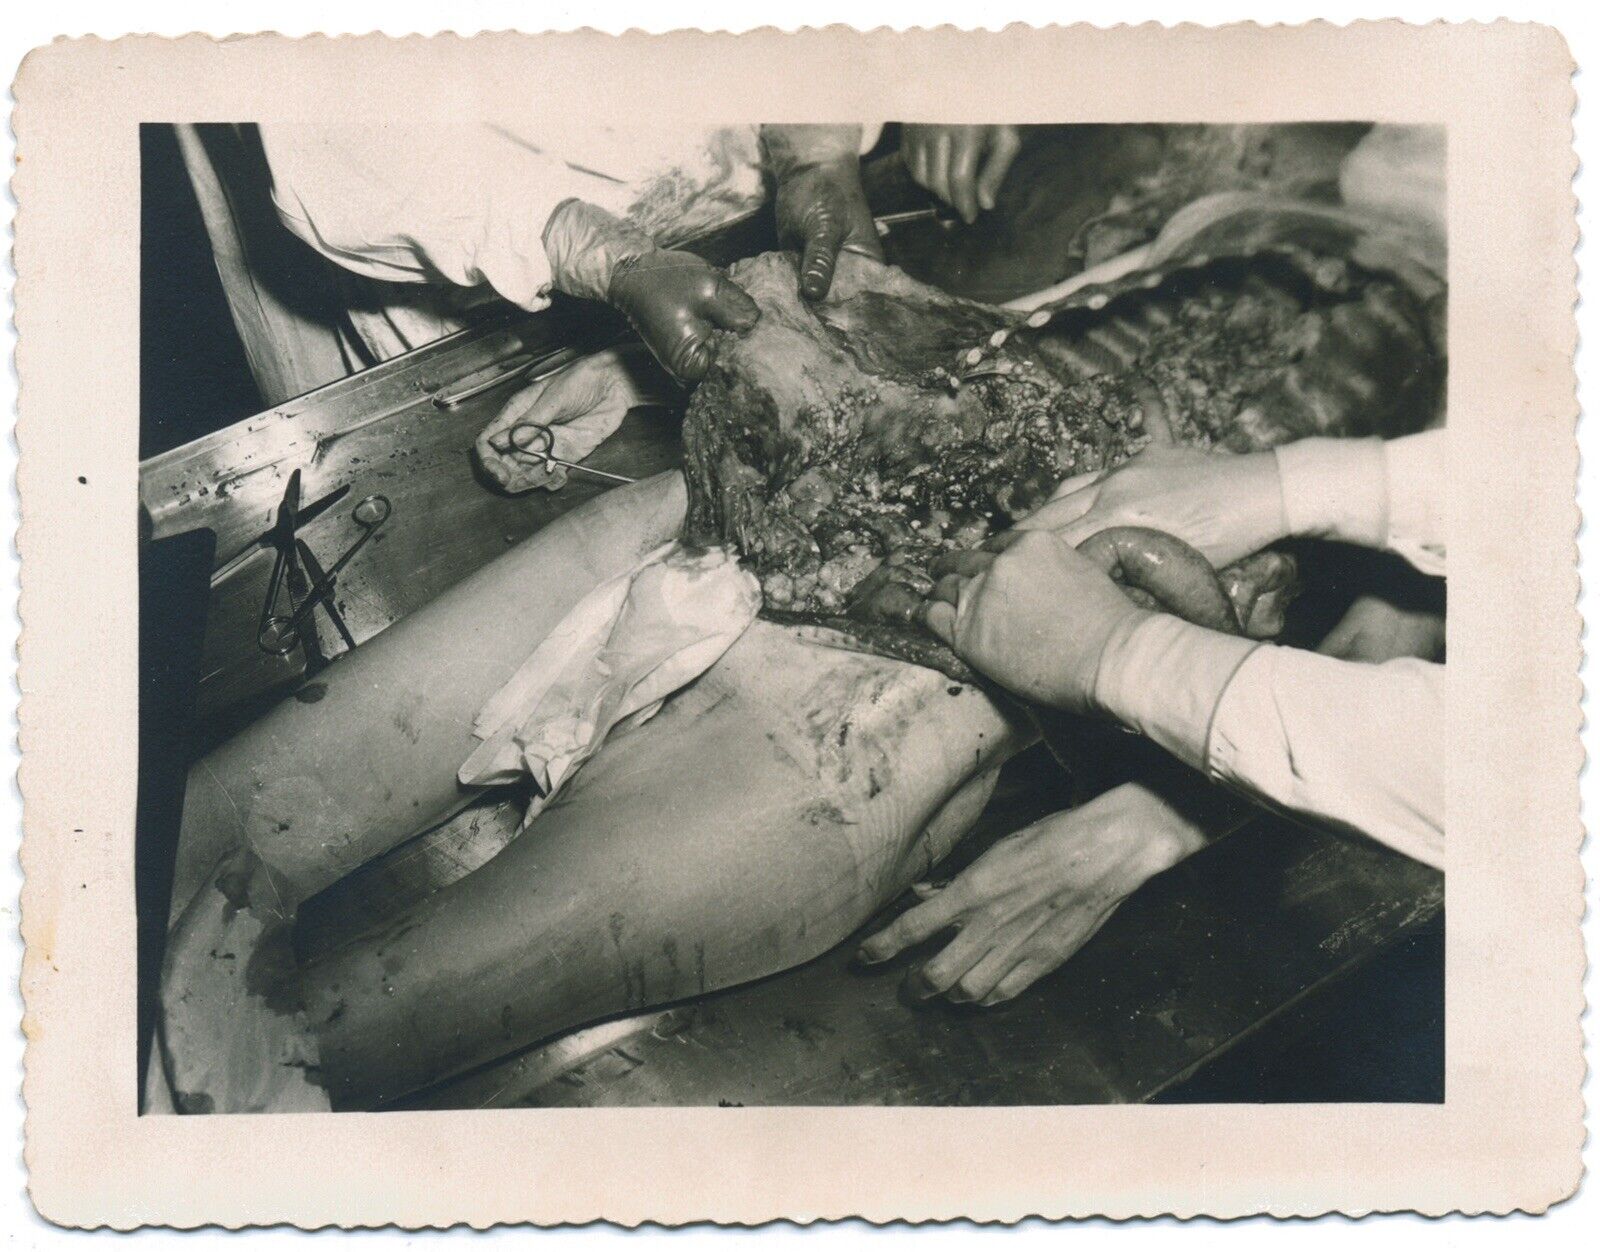 RARE WW2 Medical Dissection Autopsy Photograph Japanese Cadaver Historic 1942